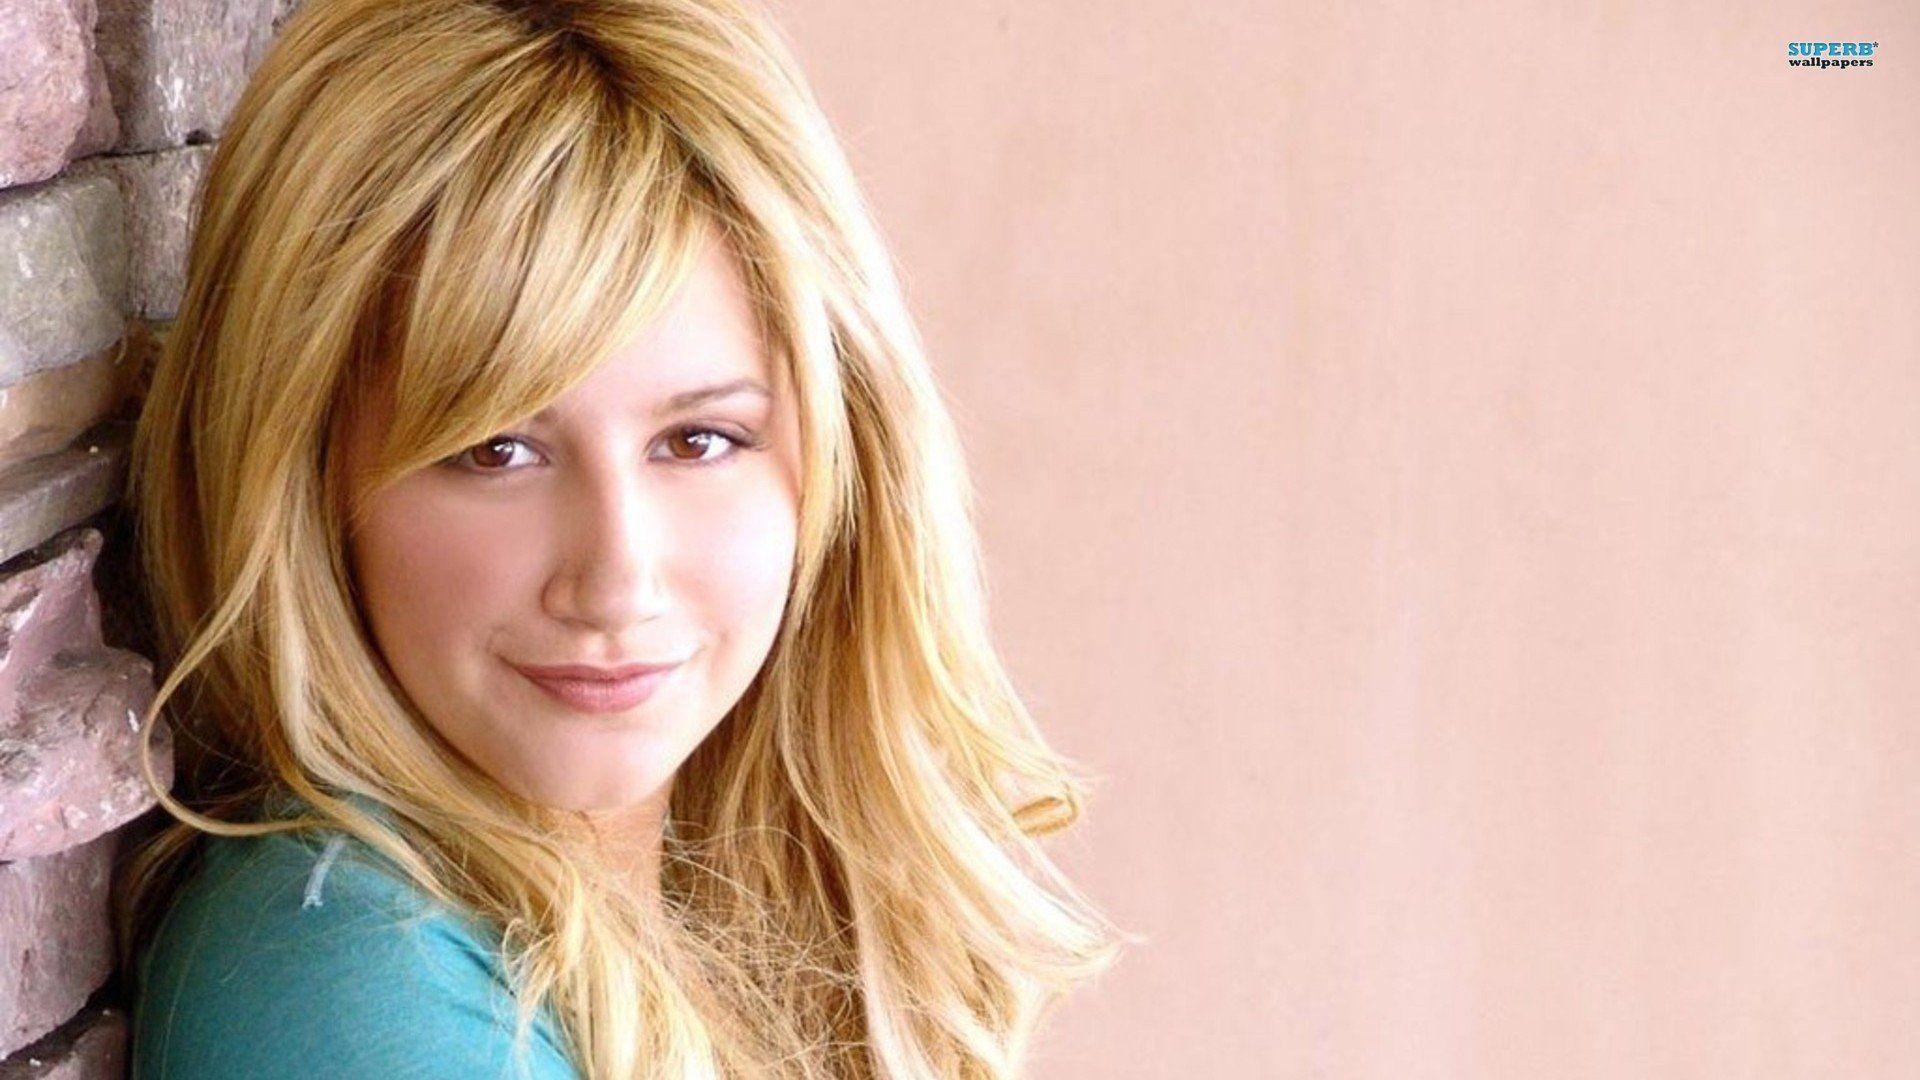 Ashley Tisdale Wallpaper Image Photo Picture Background